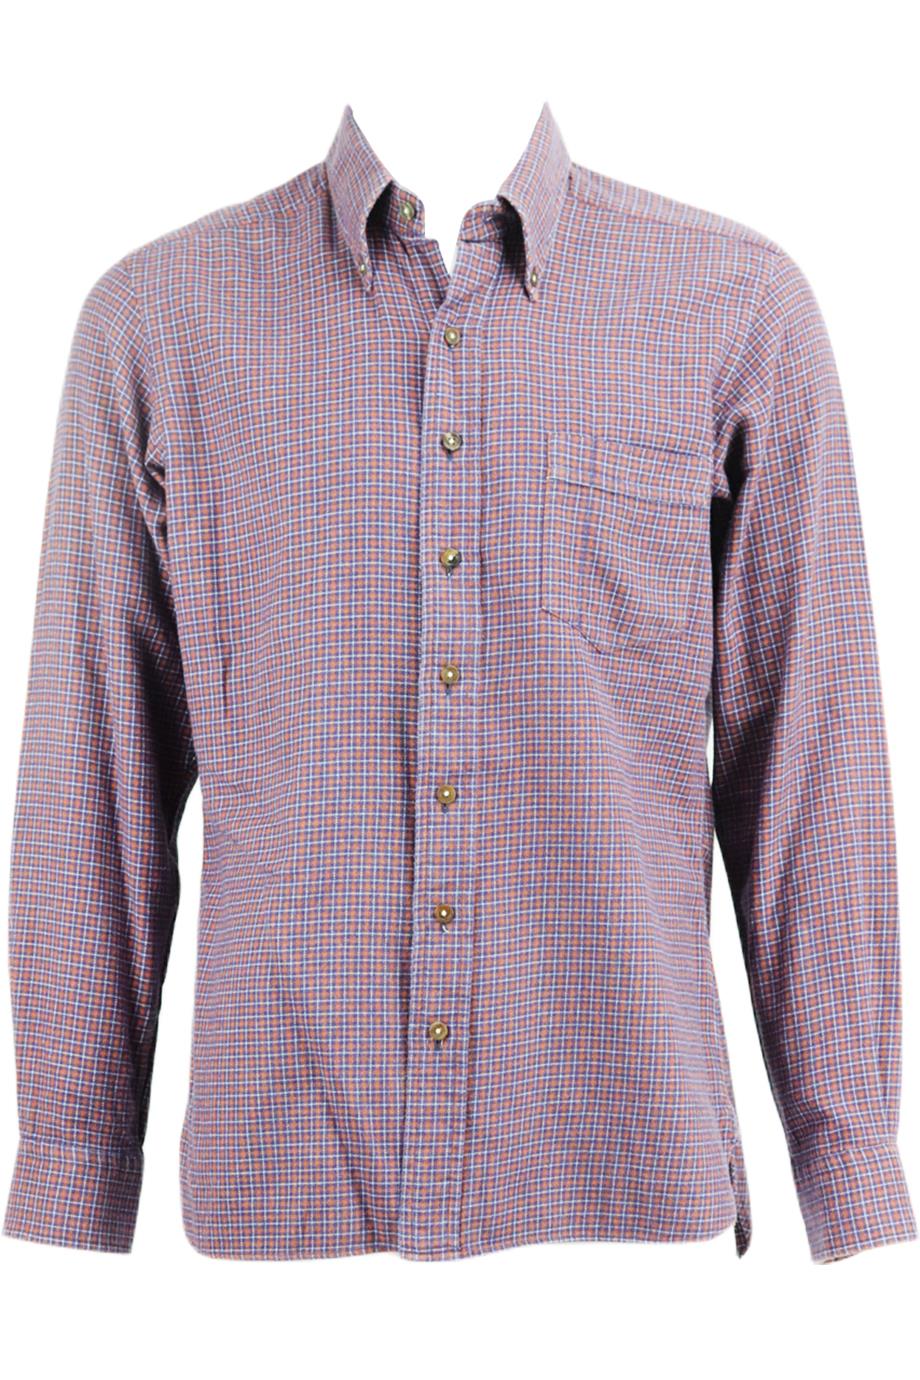 THOM SWEENEY MEN'S CHECKED COTTON FLANNEL SHIRT IT 52 UK/US CHEST 42